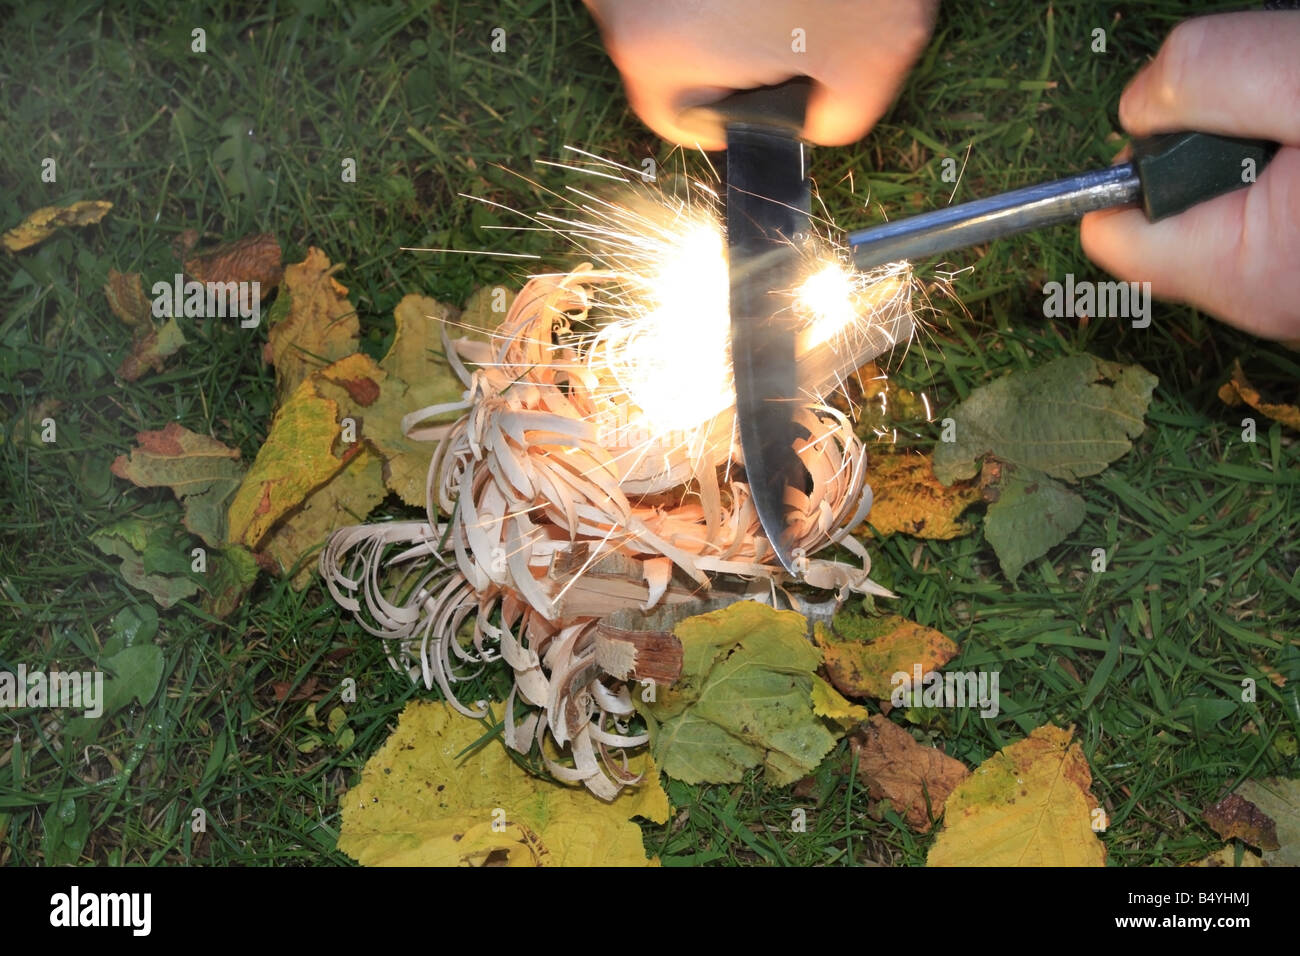 Using a Fire Steel to Ignite Feather Sticks to Create Fire Stock Photo